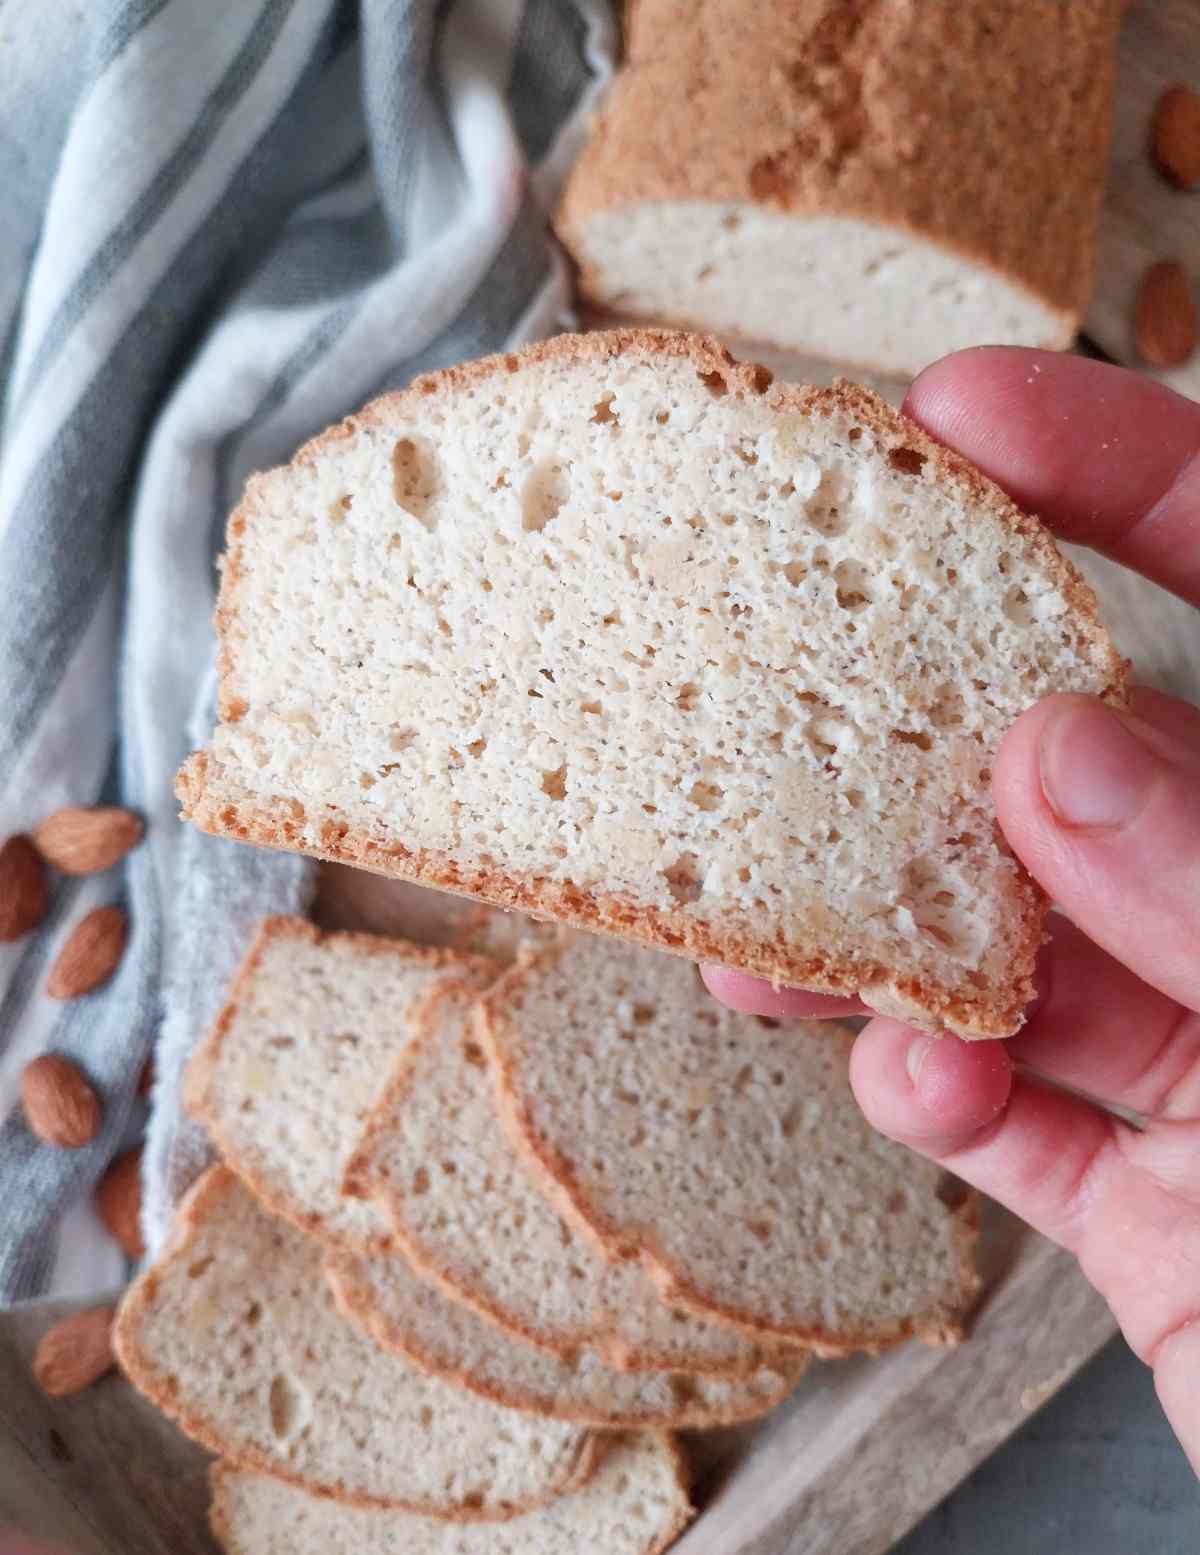 A slice of low-carb gluten-free bread up close with the rest of the bread in the background.